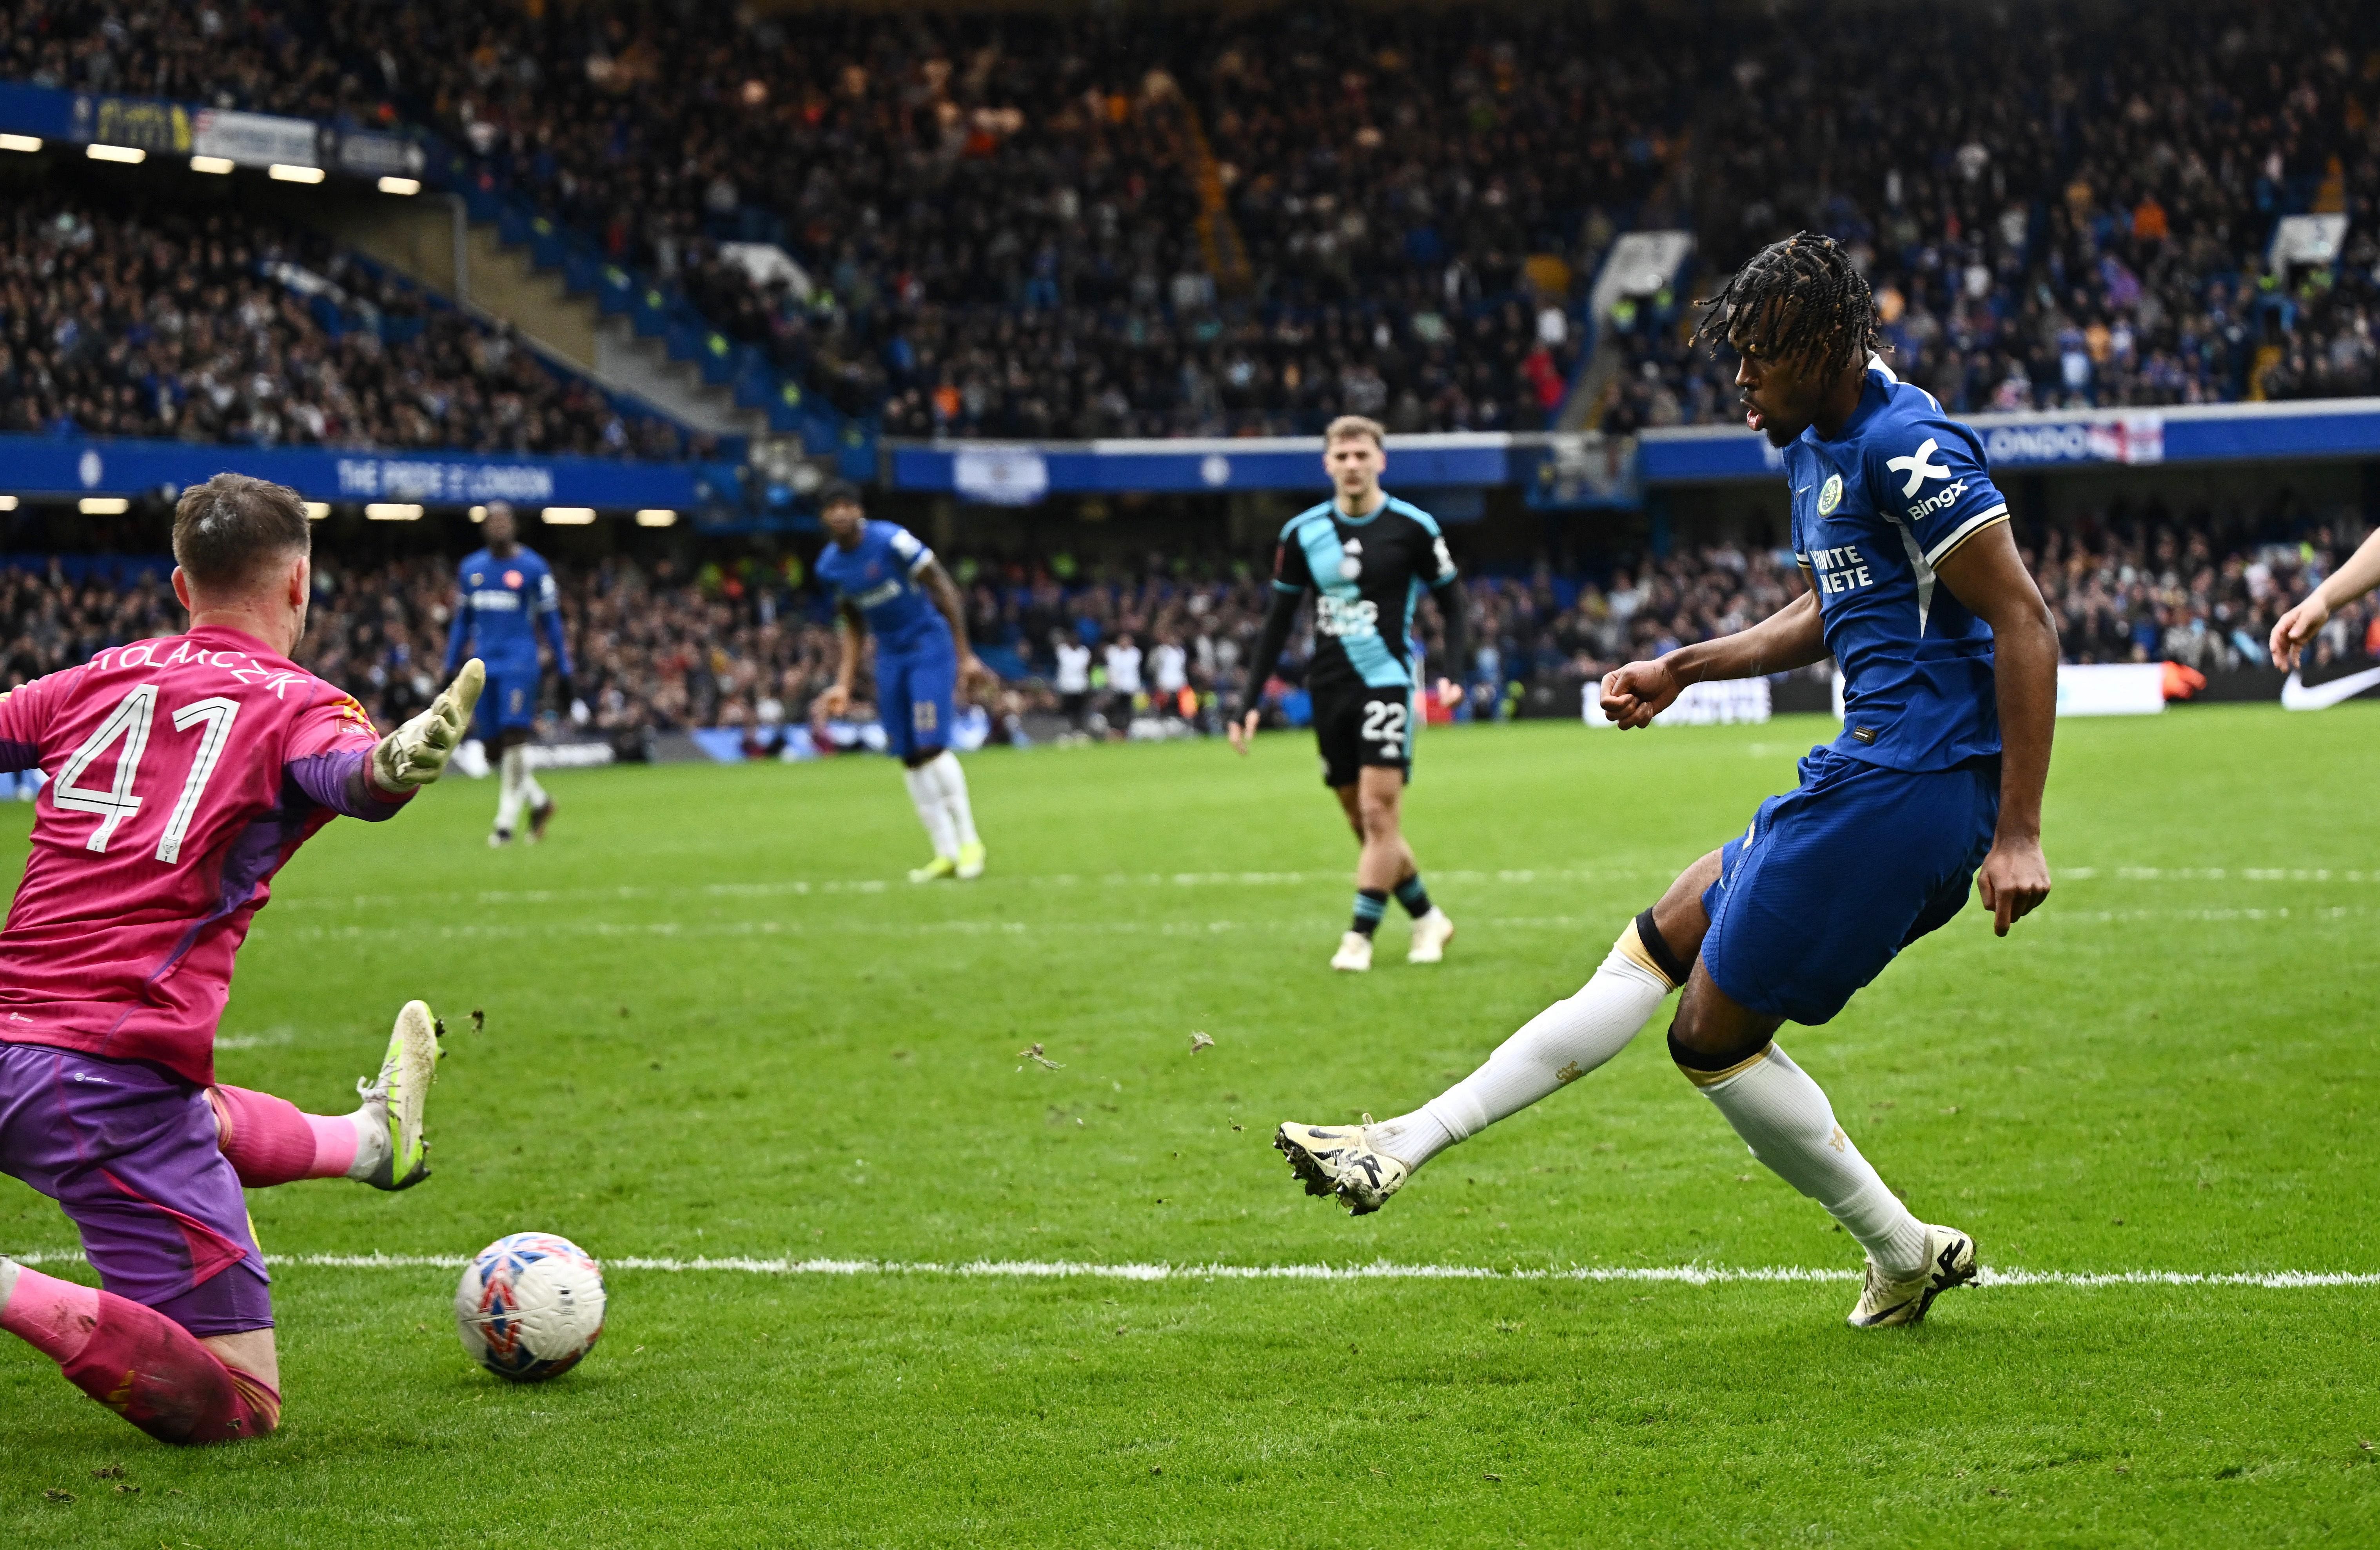 Chelsea survive scare before beating Leicester City 4-2 in FA Cup quarter-finals